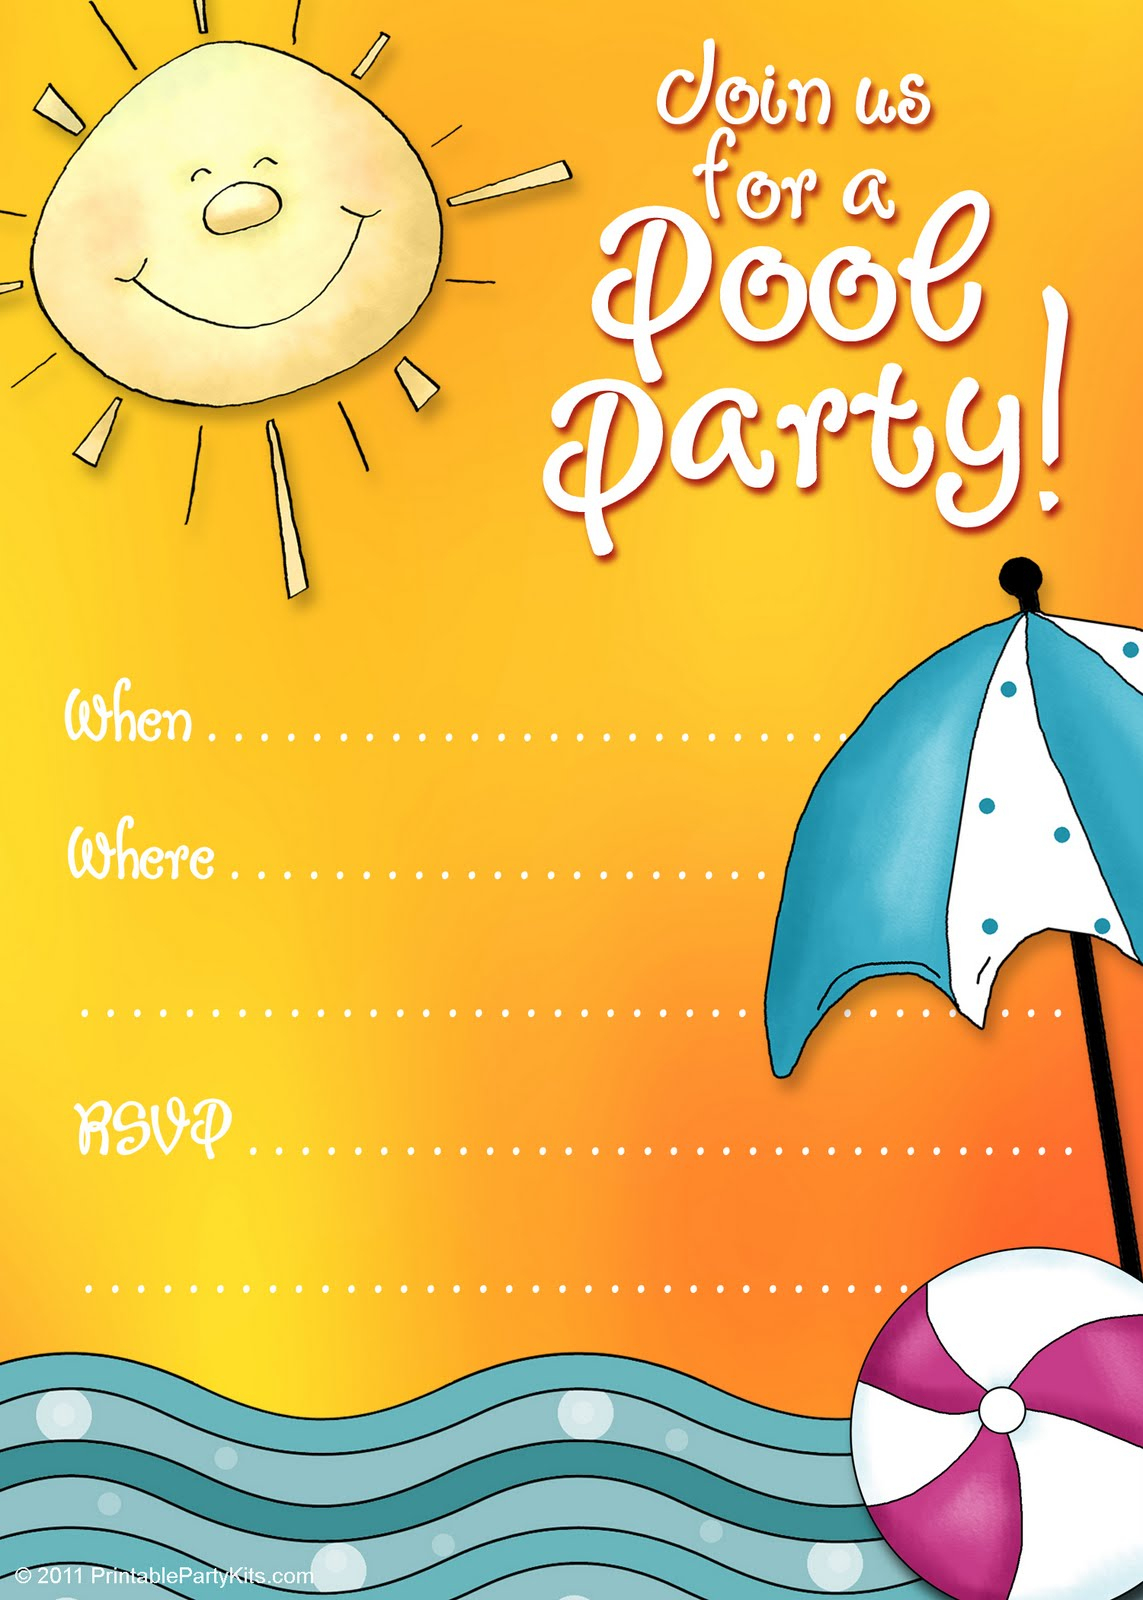 45 Pool Party Invitations | Kittybabylove - Free Printable Pool Party Birthday Invitations